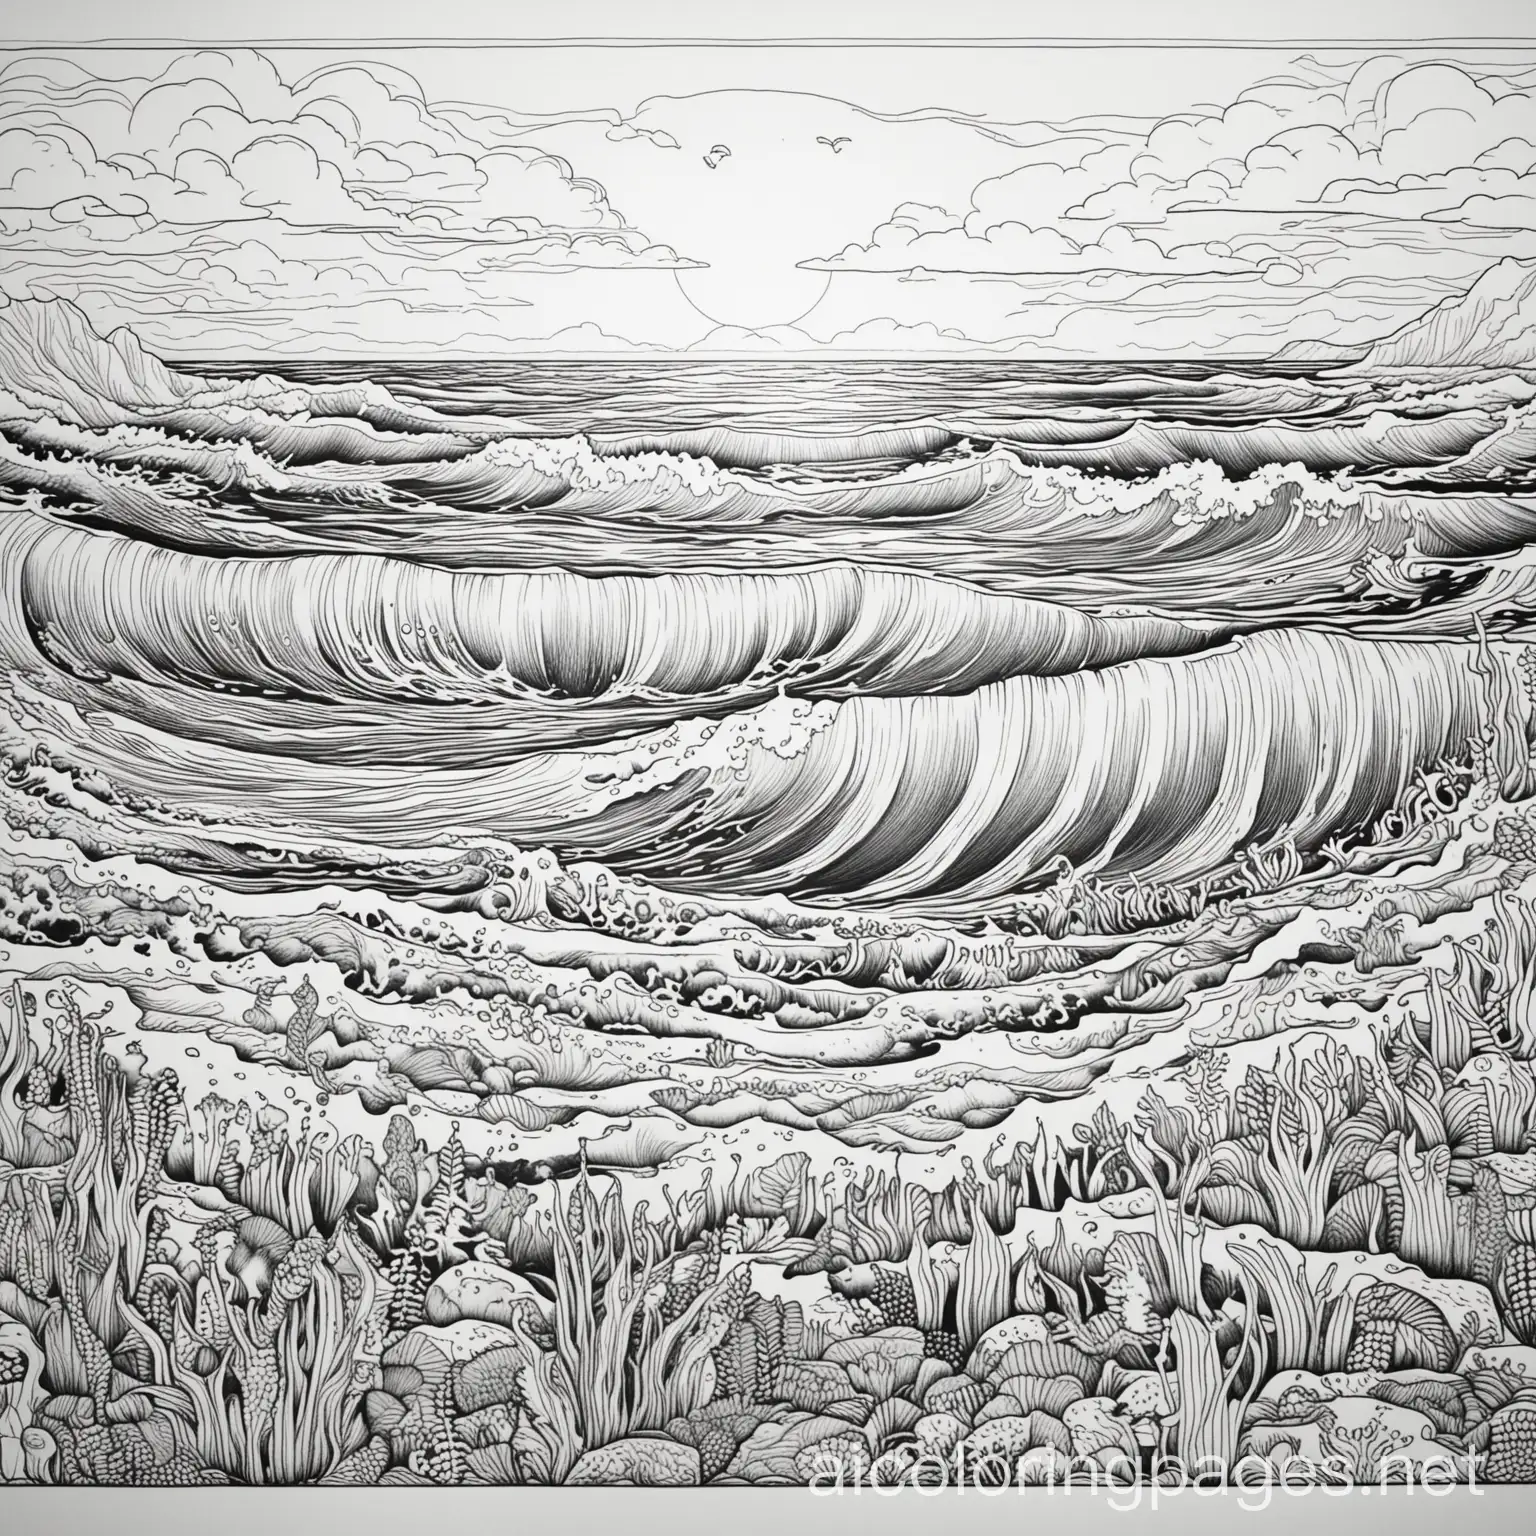 ocean coloring page




 , Coloring Page, black and white, line art, white background, Simplicity, Ample White Space. The background of the coloring page is plain white to make it easy for young children to color within the lines. The outlines of all the subjects are easy to distinguish, making it simple for kids to color without too much difficulty